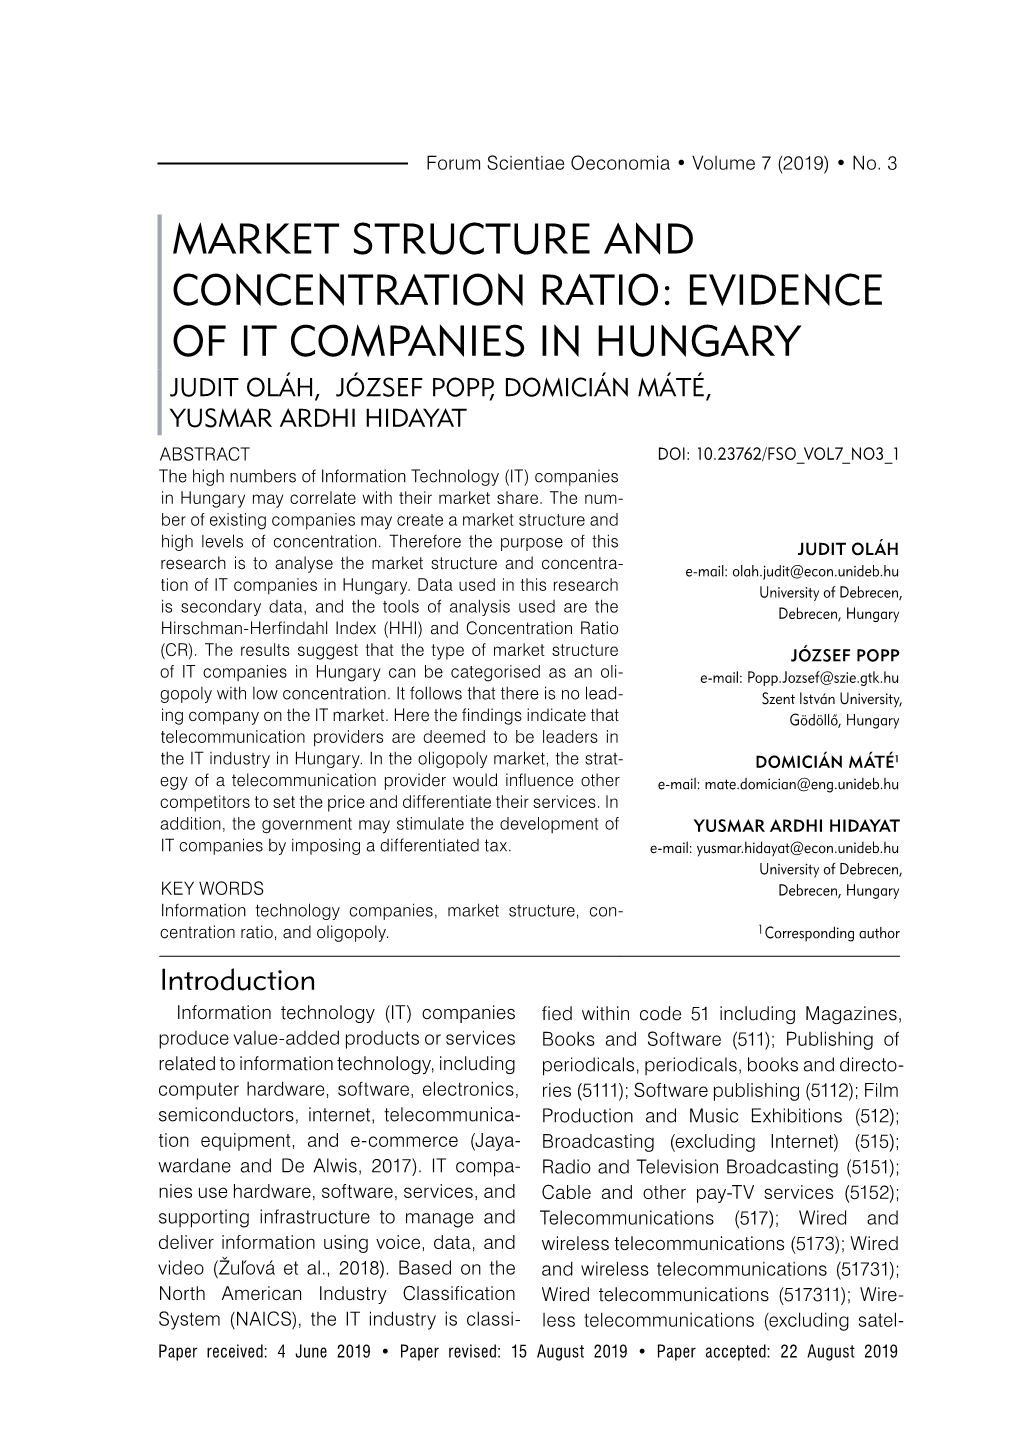 Market Structure and Concentration Ratio: Evidence of It Companies in Hungary